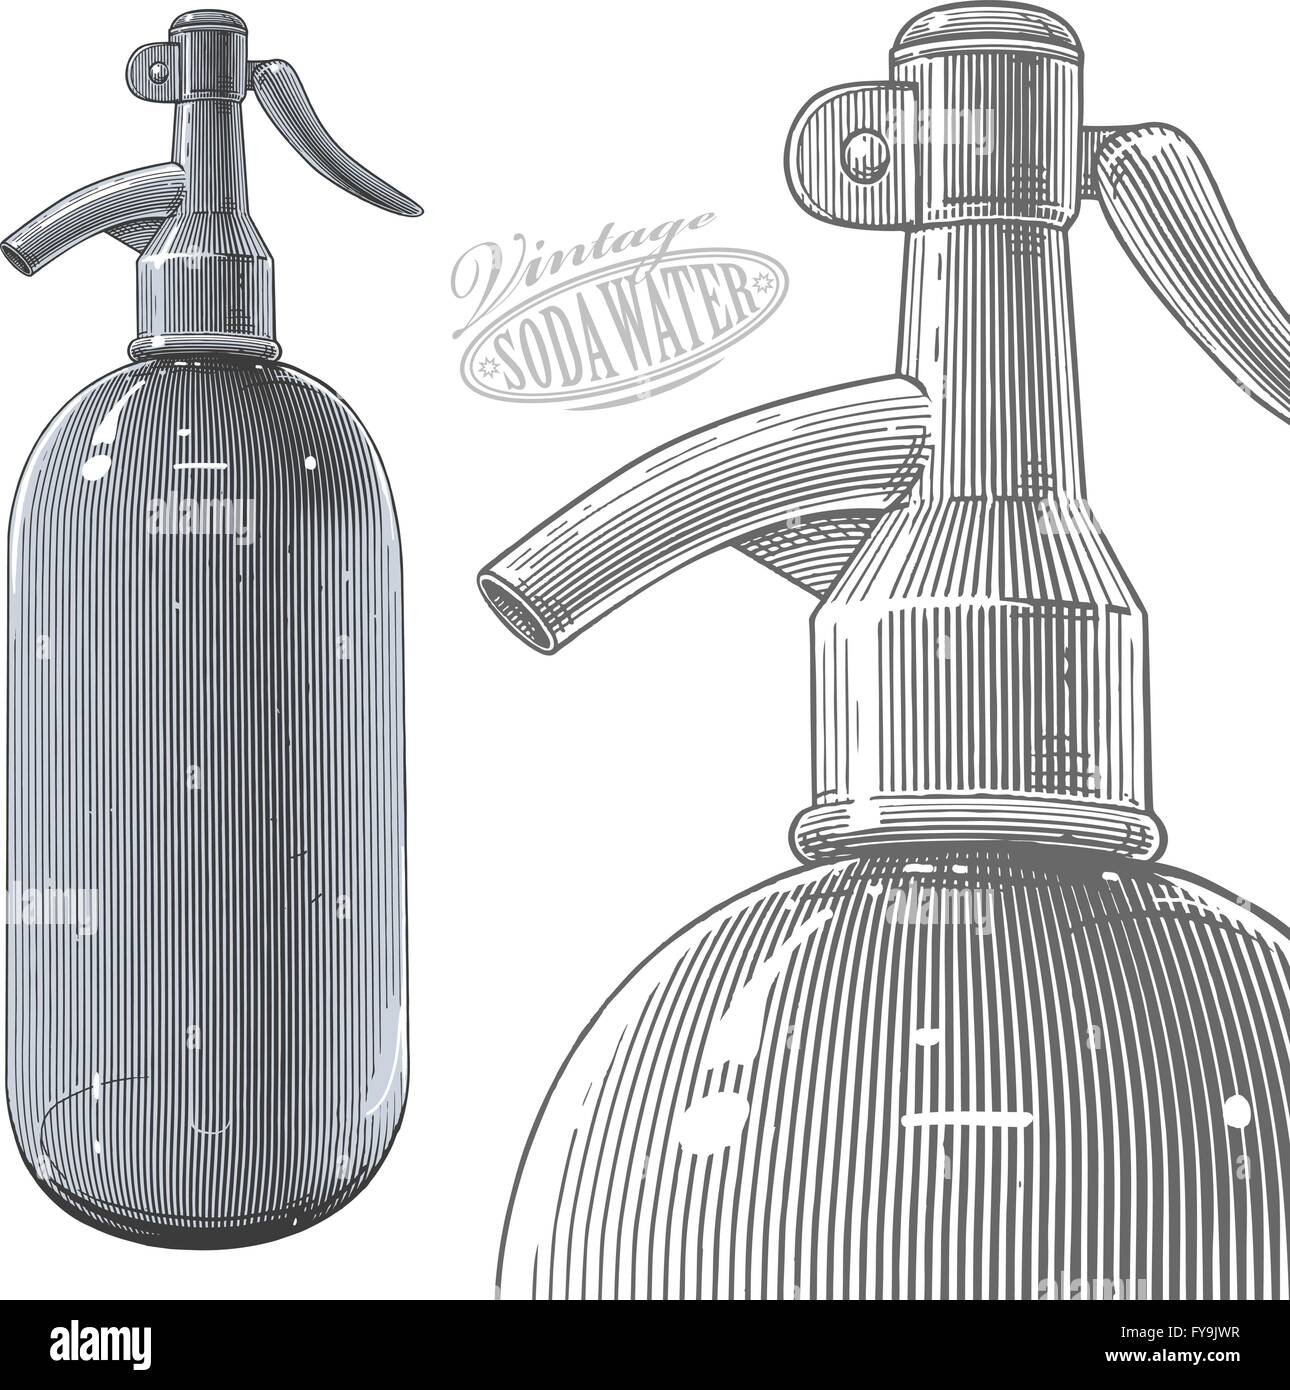 Vintage siphon or soda bottle in engraving style Stock Vector